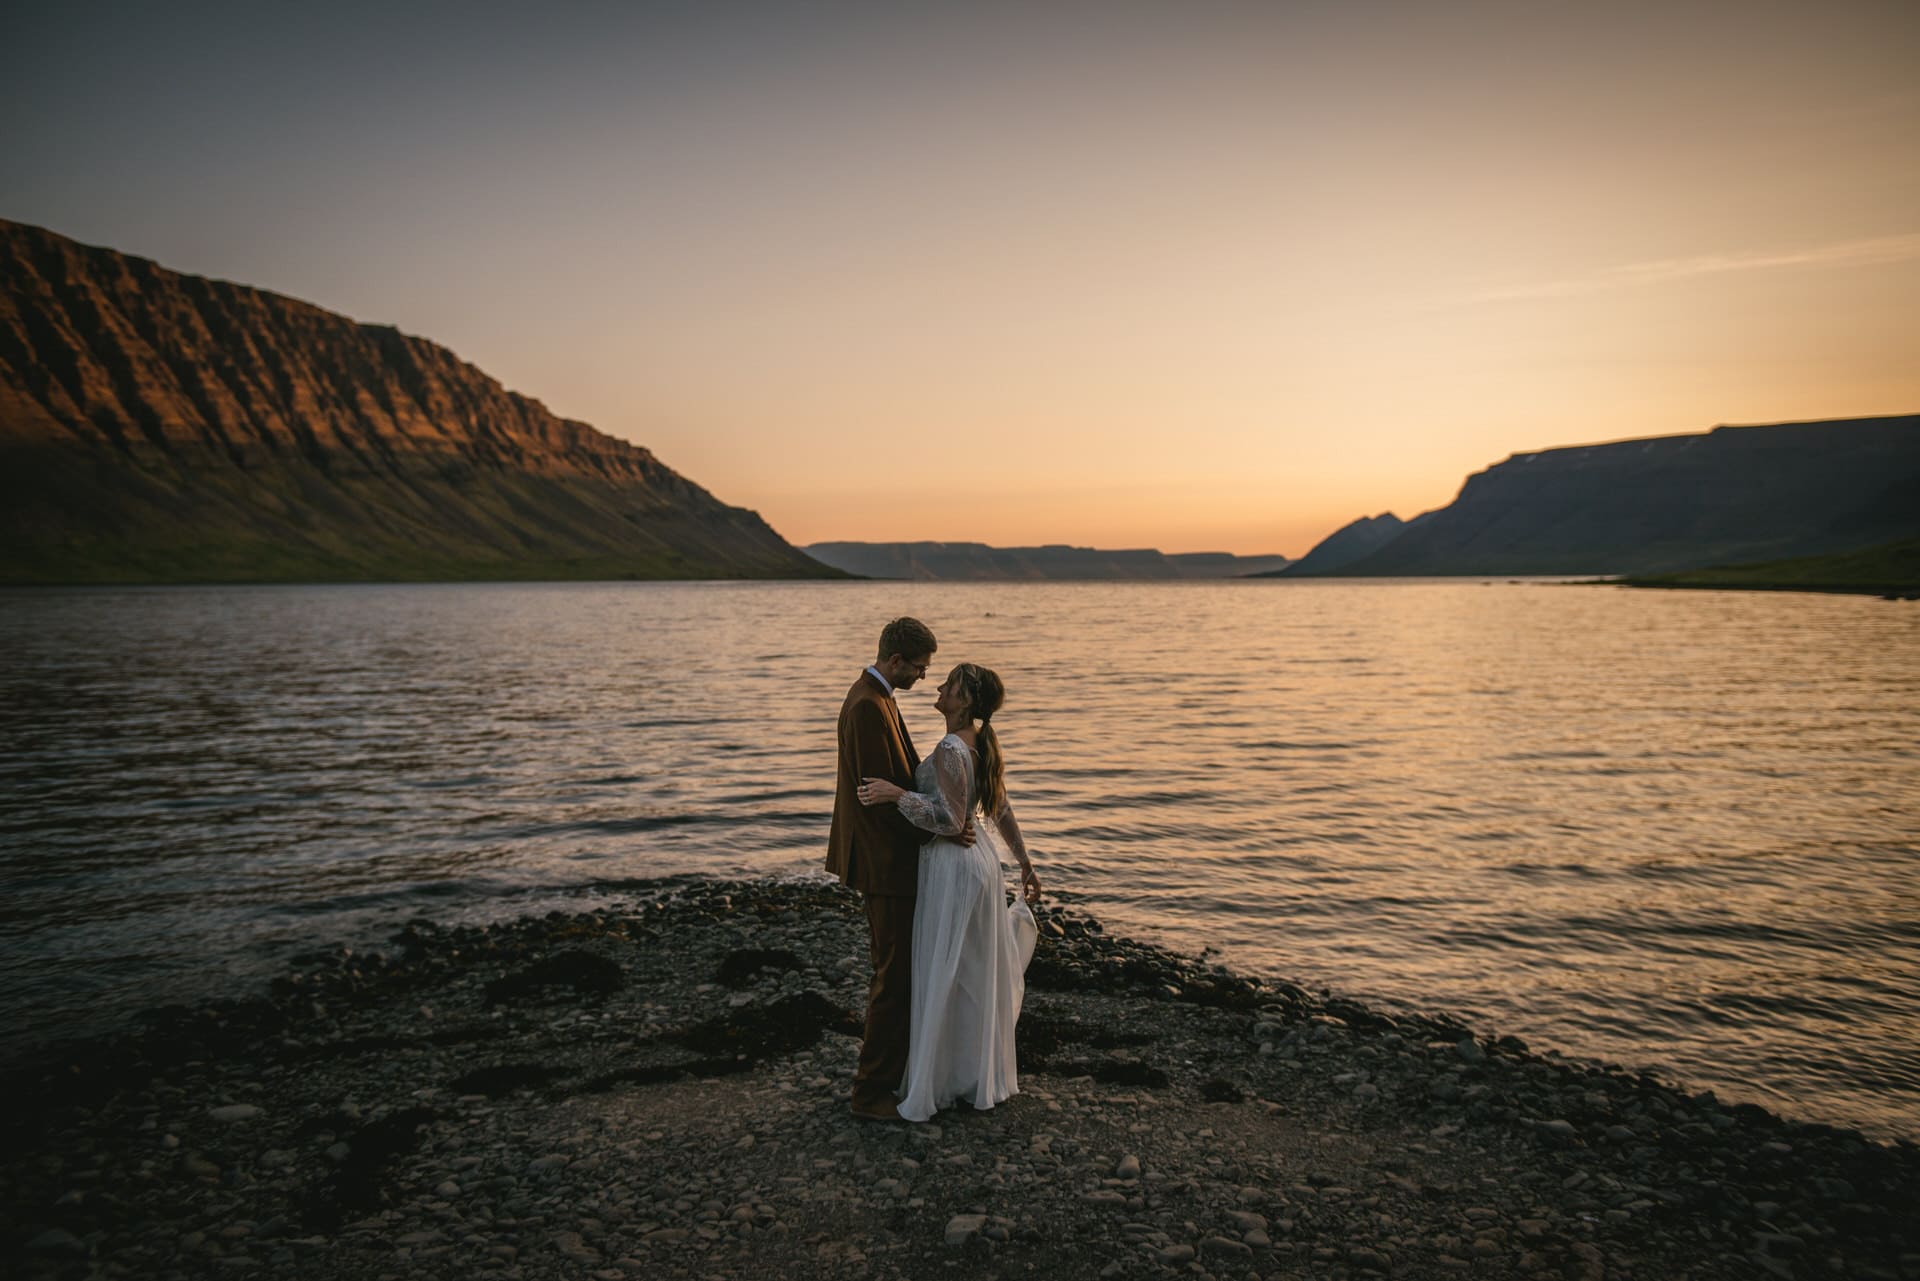 Silhouette of the couple framed against the golden hues of the Icelandic sunset.